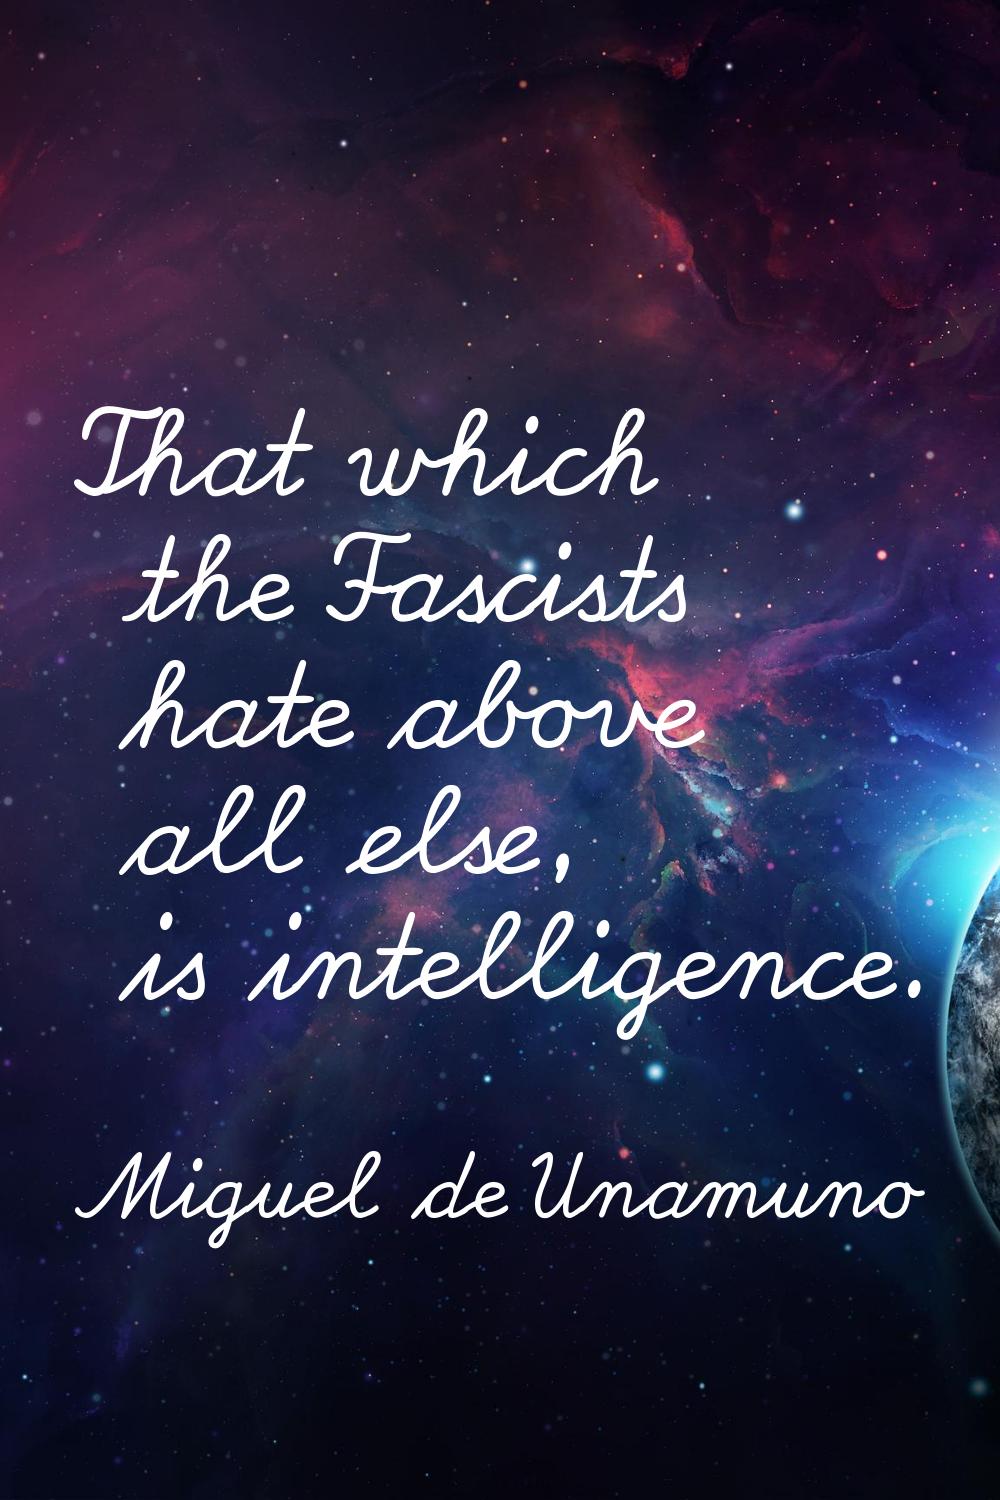 That which the Fascists hate above all else, is intelligence.